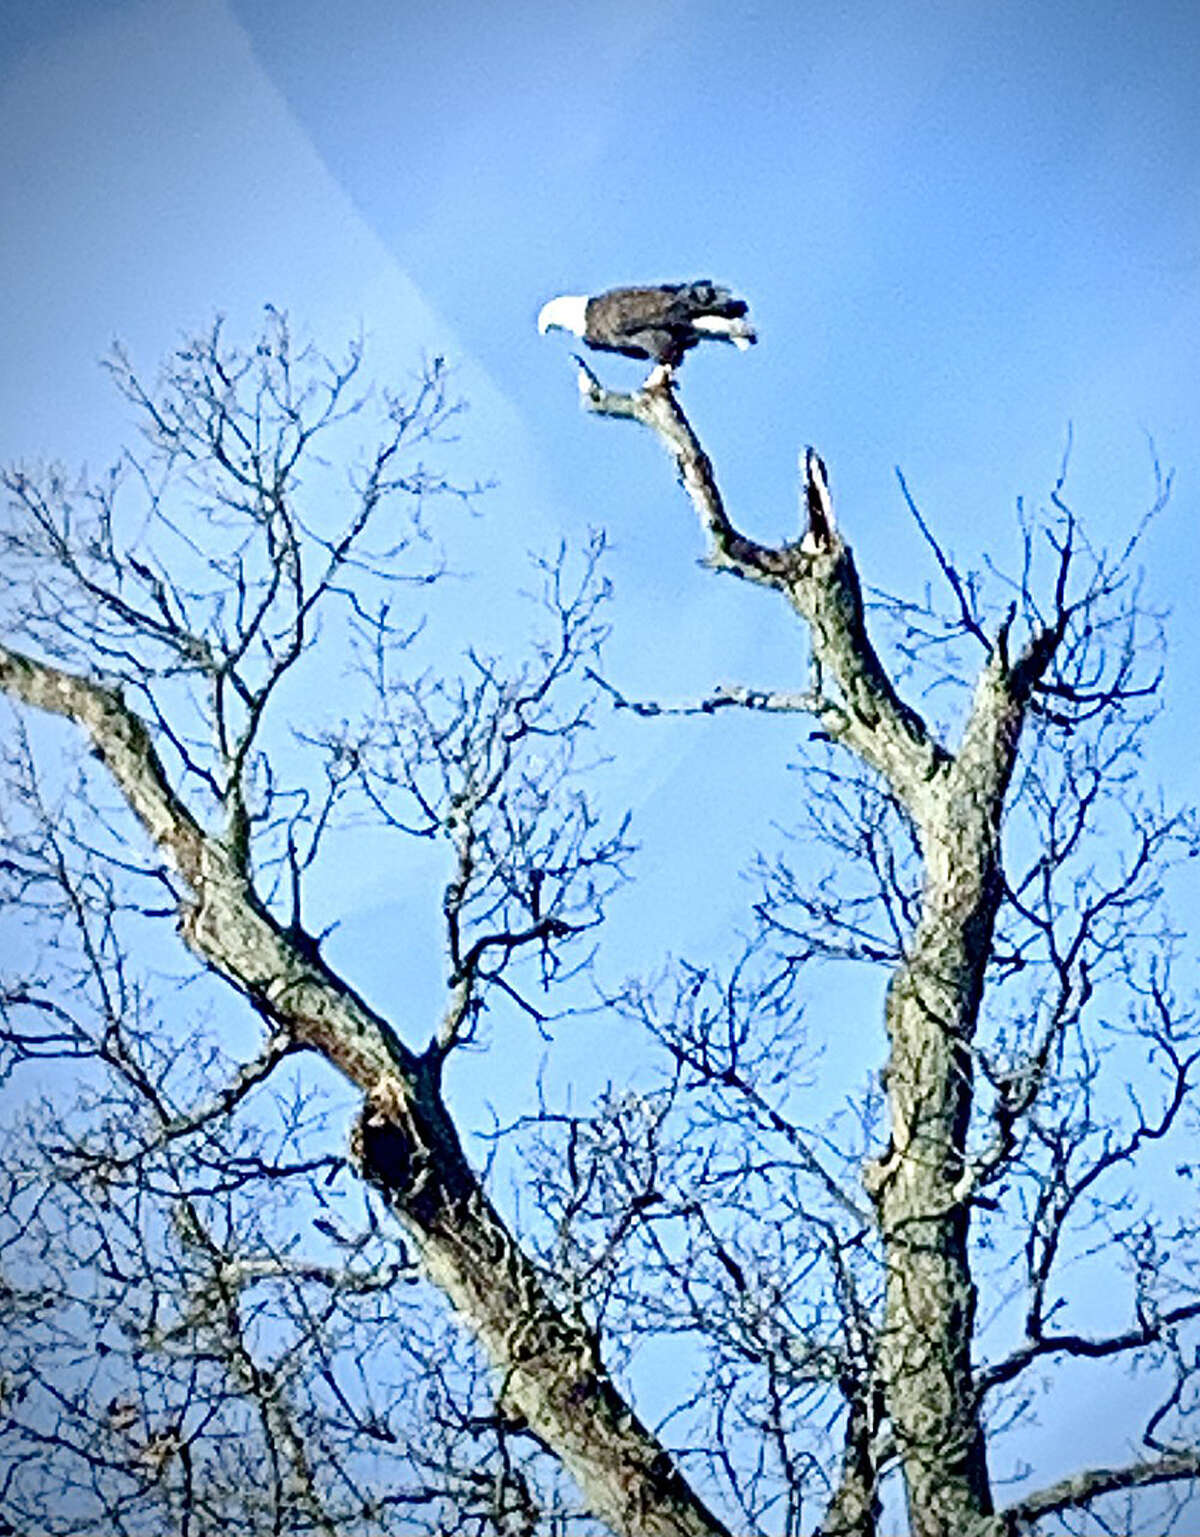 An eagle almost appears to be balancing on one leg as it looks out across the land from the highest point of a bare tree.